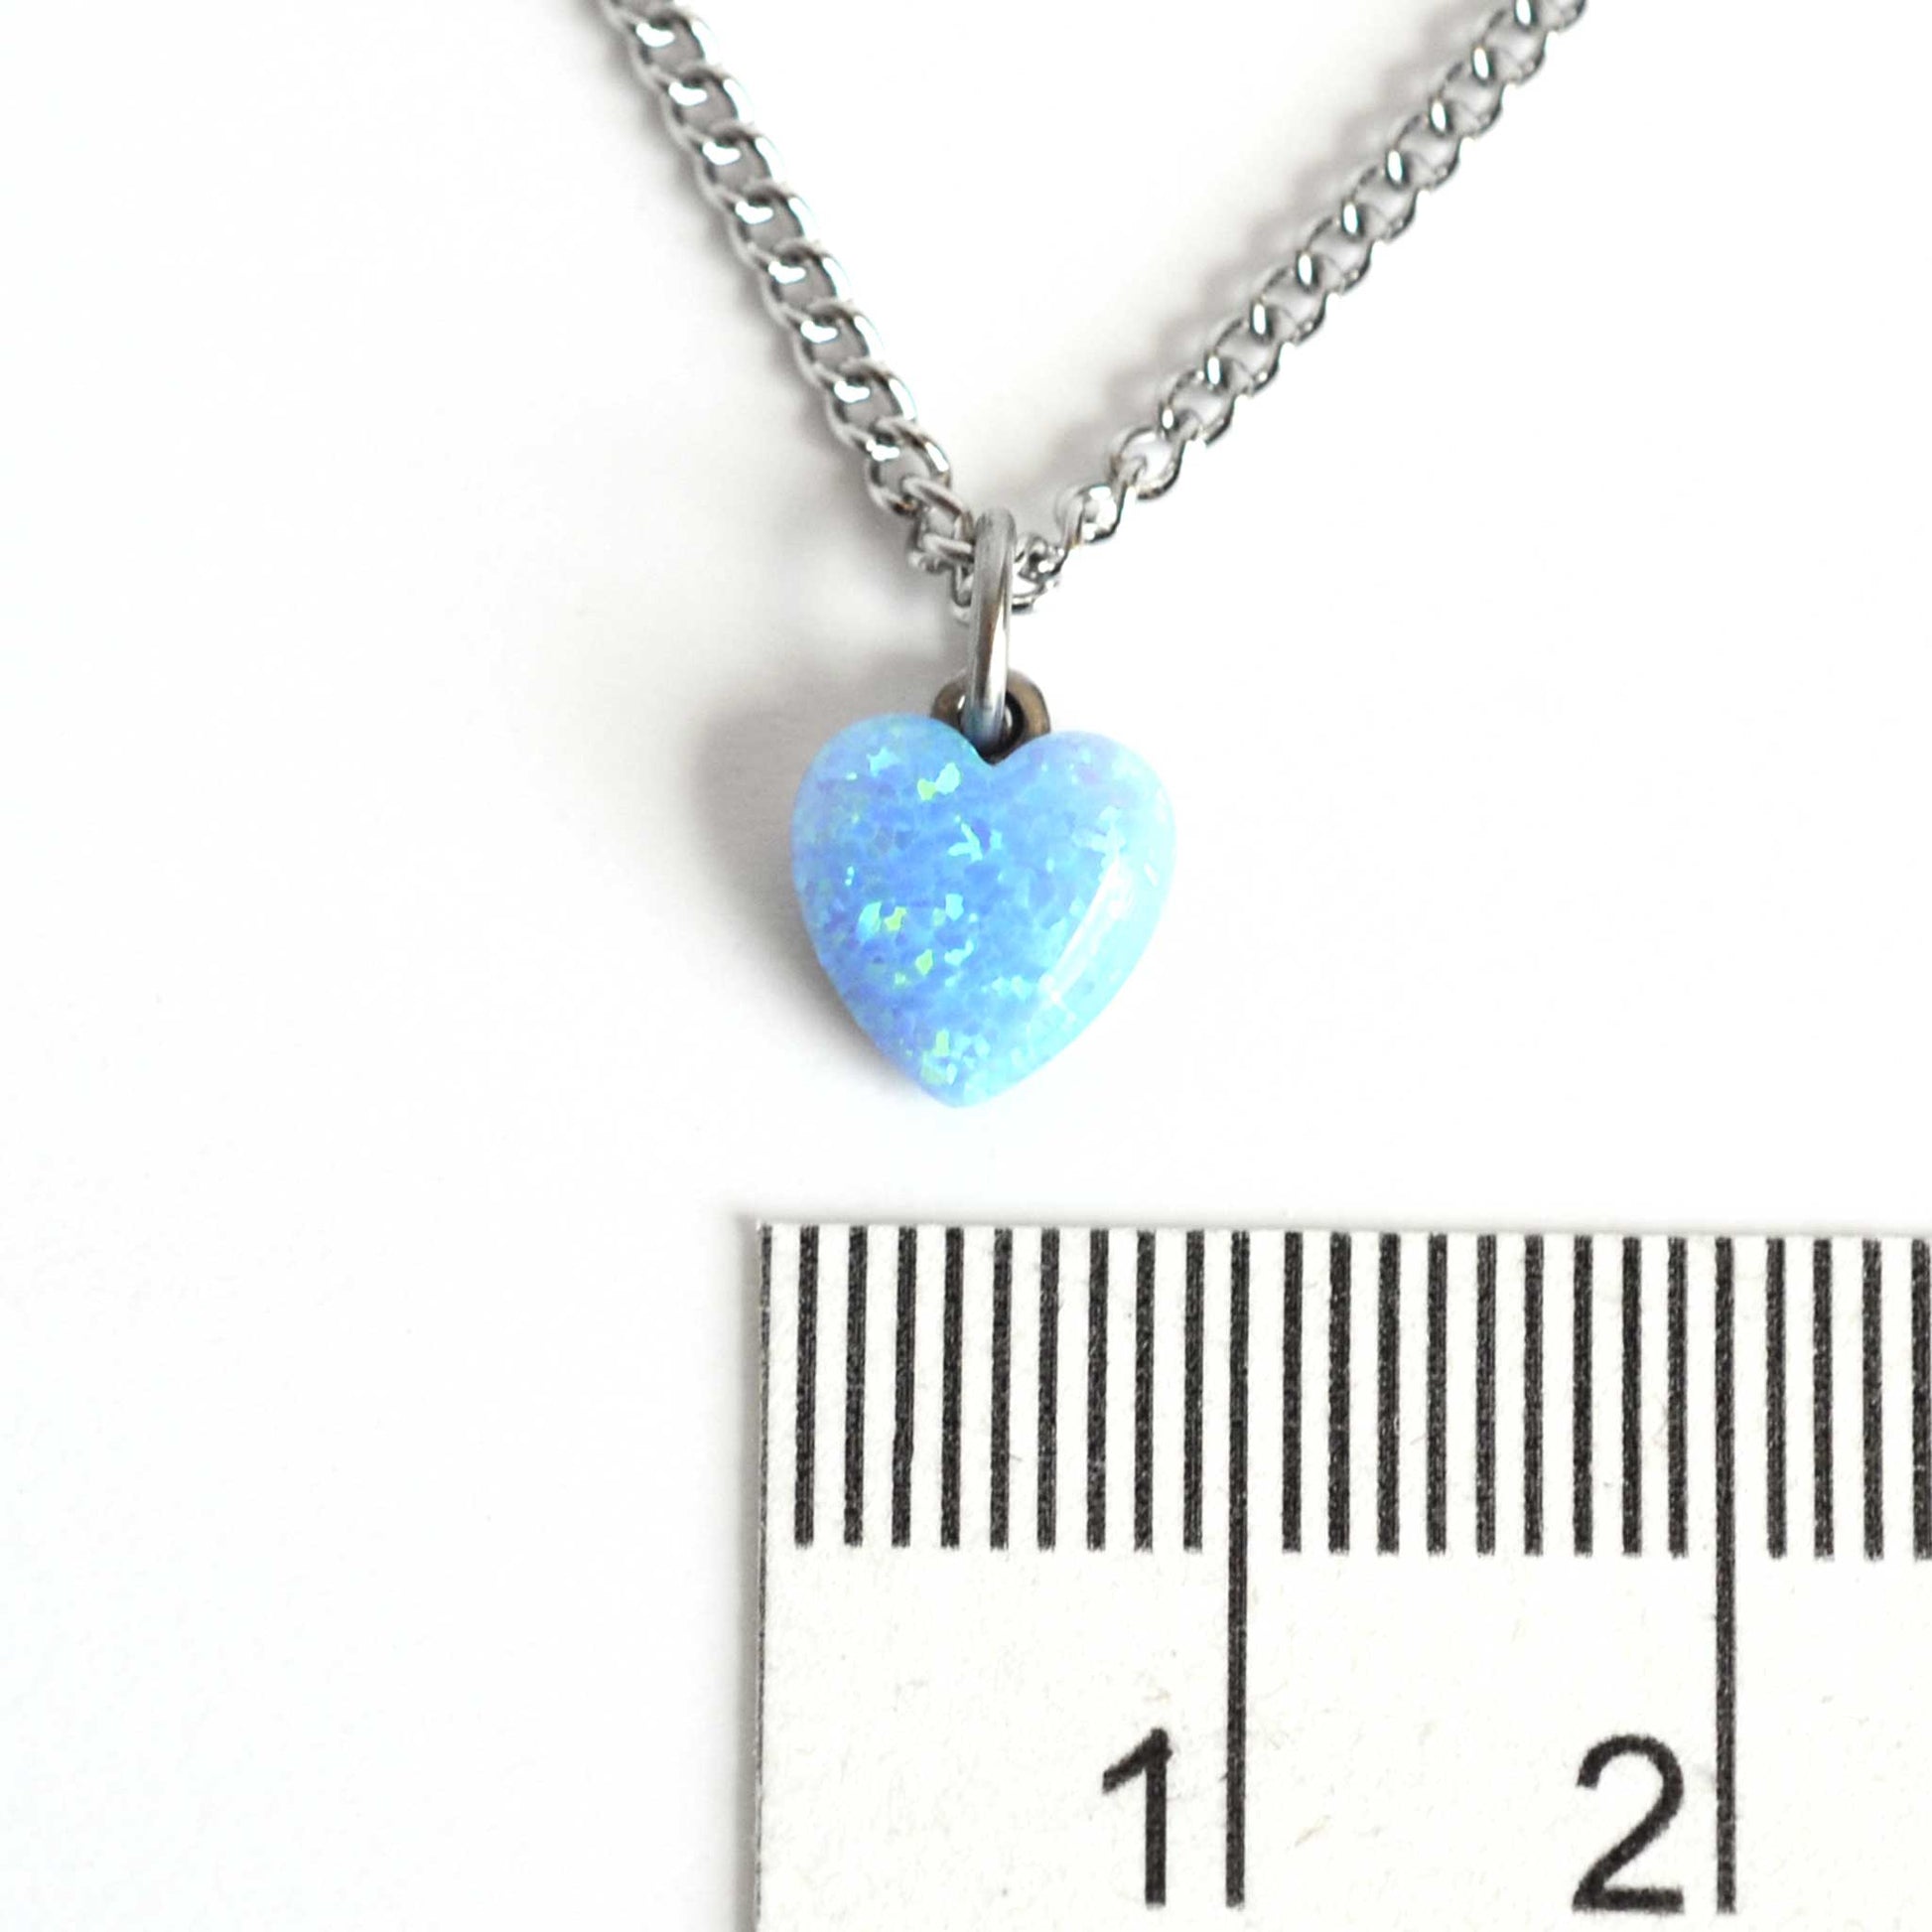 8mm blue heart pendant necklace next to ruler